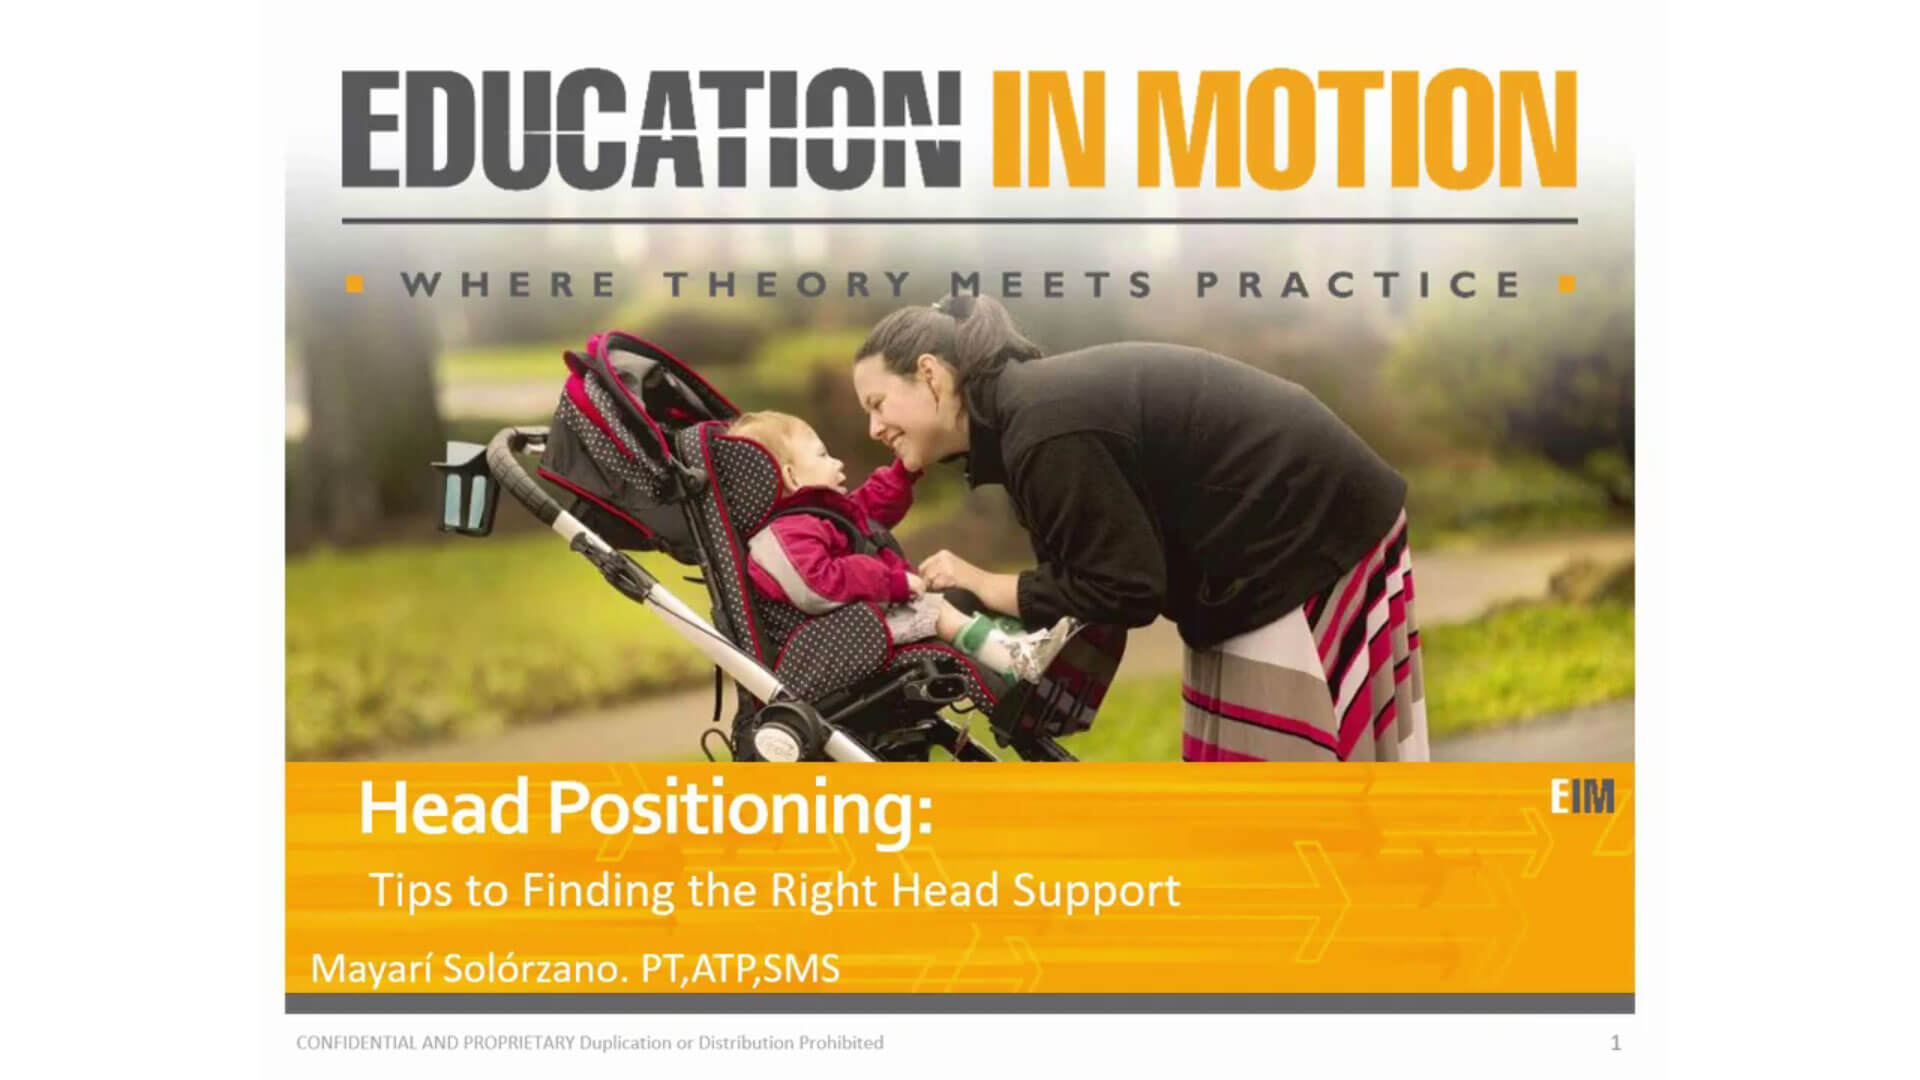 Head Positioning: Tips to Finding the Right Head Support